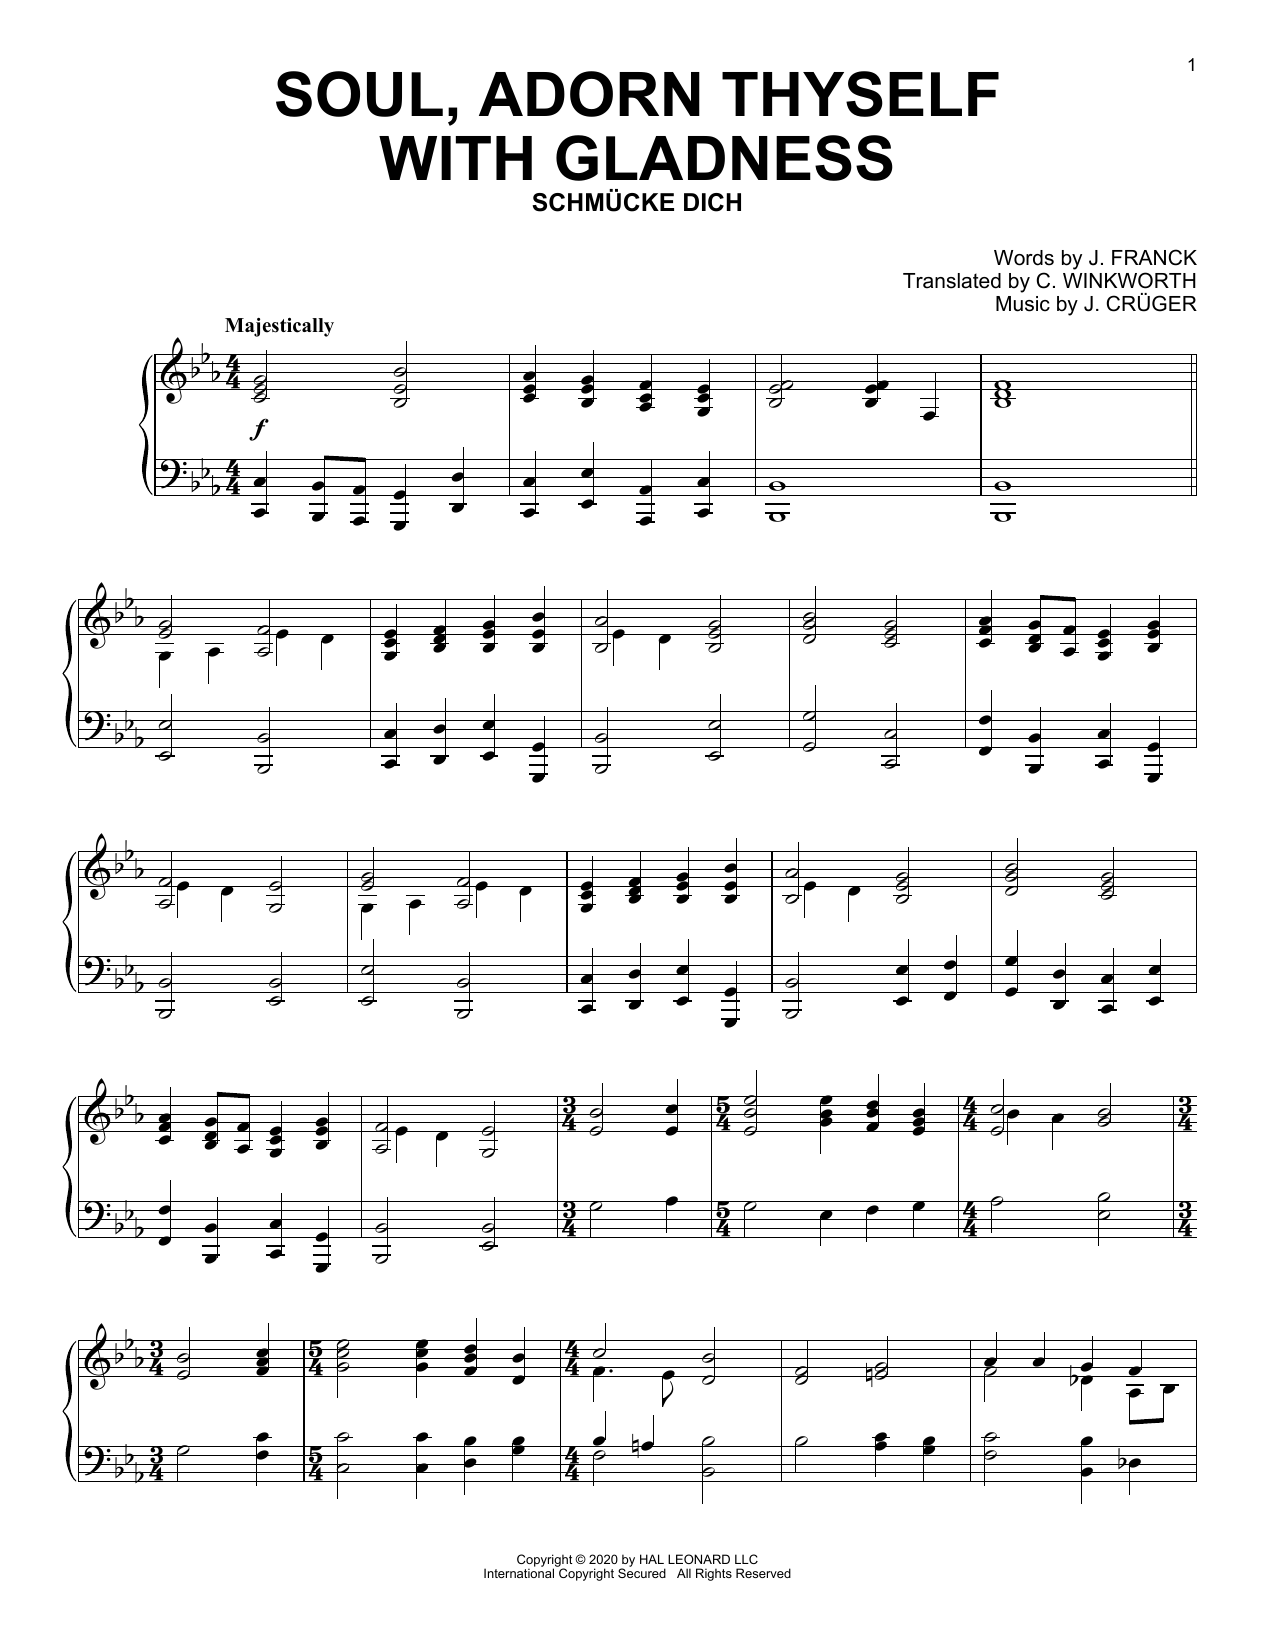 Download J. Cruger Soul, Adorn Thyself With Gladness Sheet Music